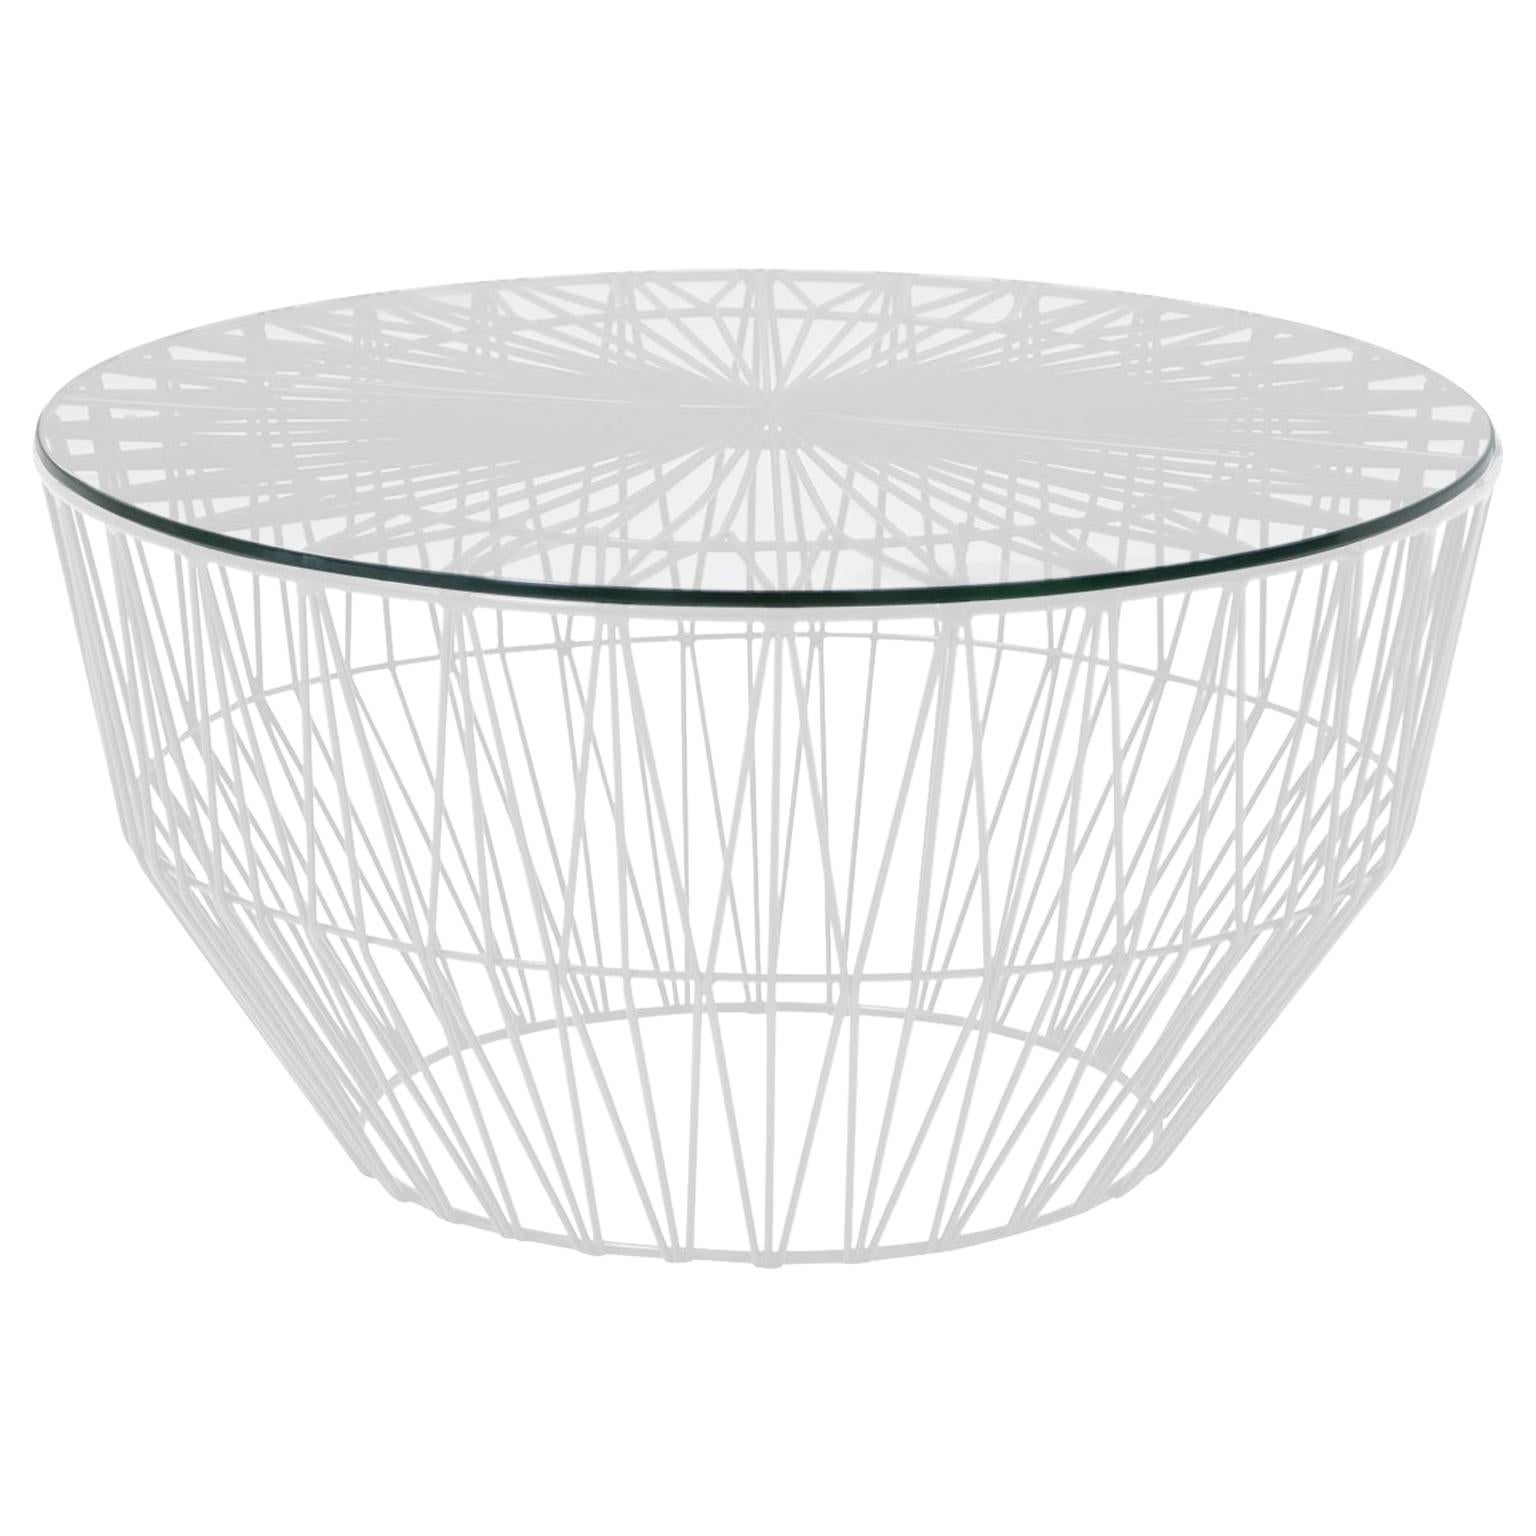 Outdoor Table Ottoman, the Drum Table by Bend Goods, White with Glass